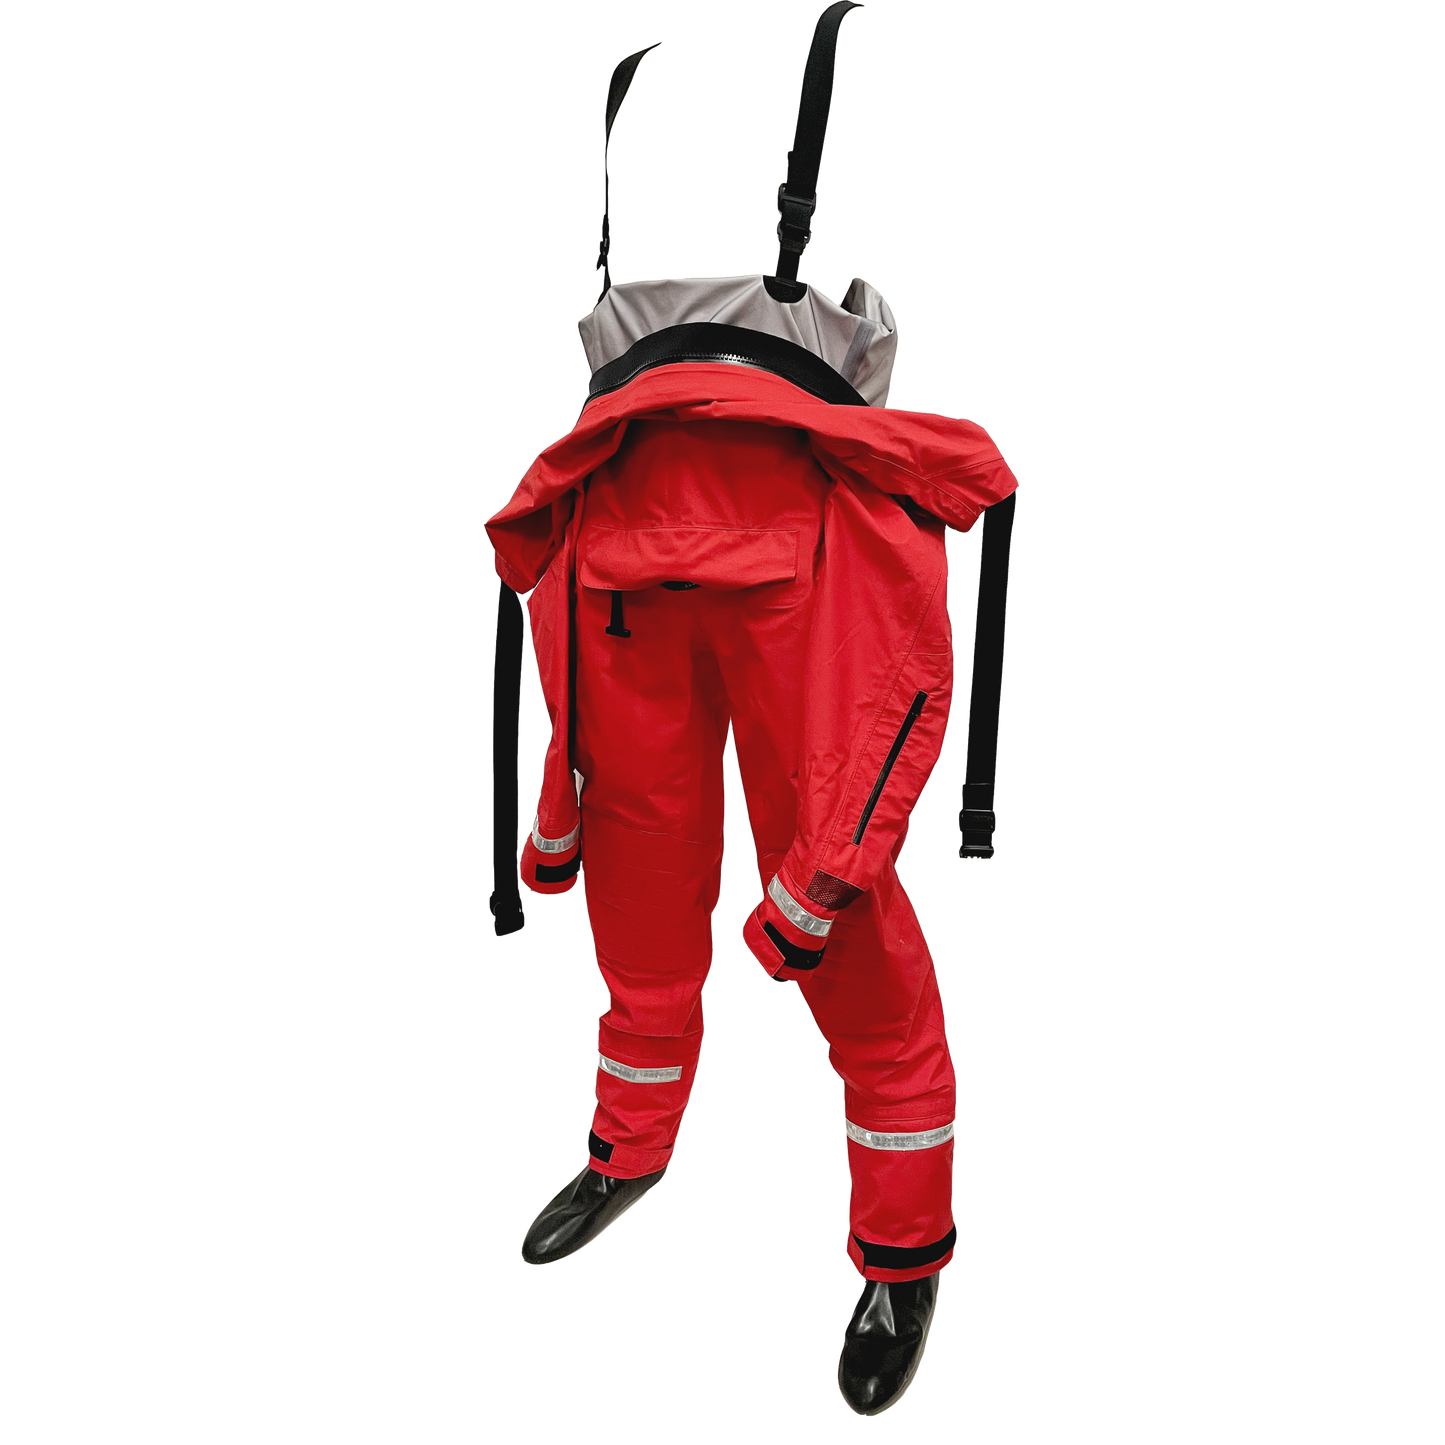 THE LEVEN (AGRESSOR) DRY SUIT